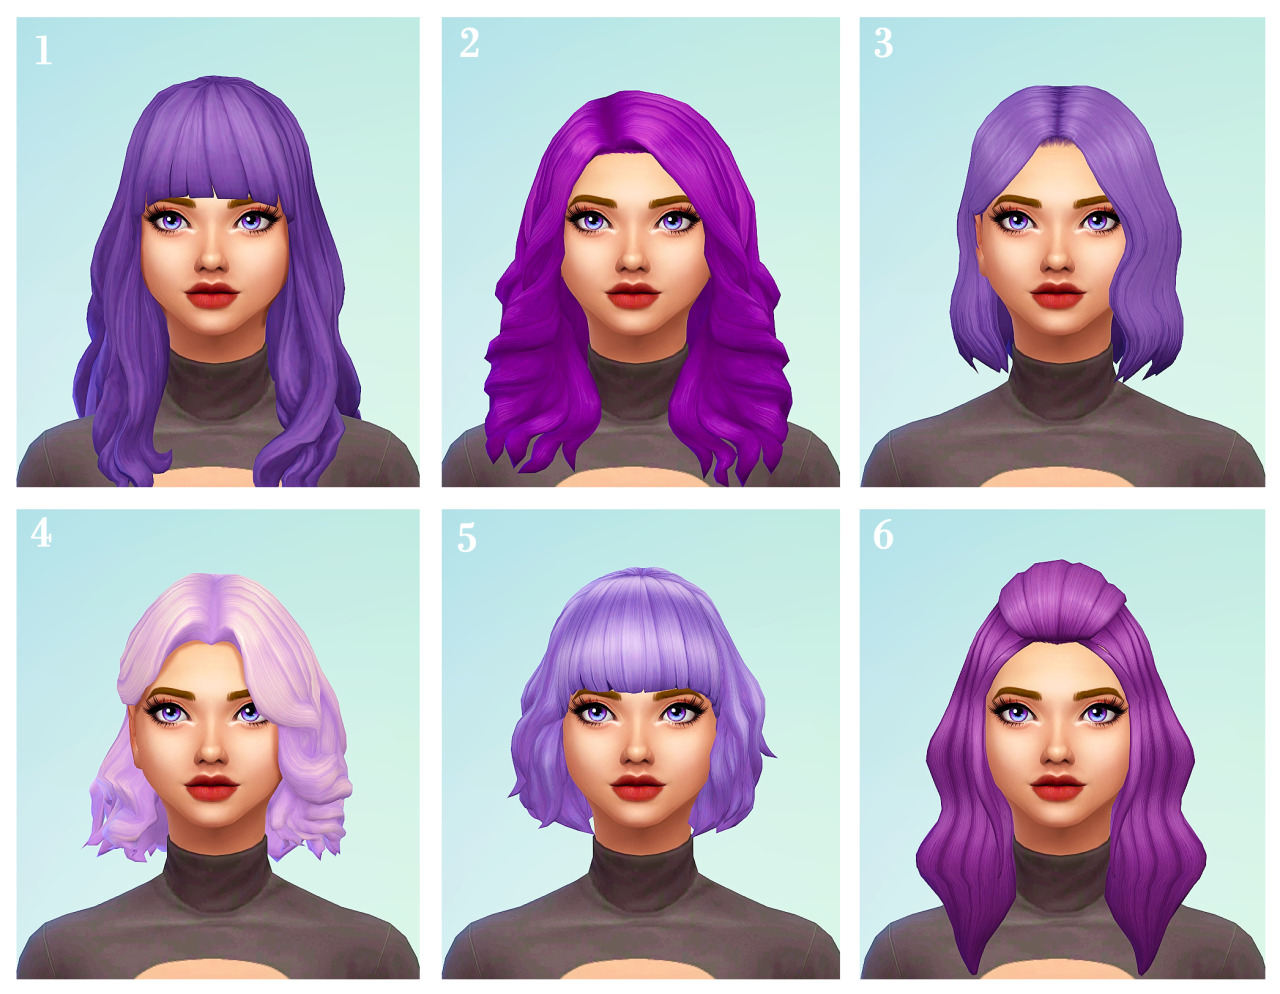 4. Lana CC Finds: Purple and Blue Hair - wide 5